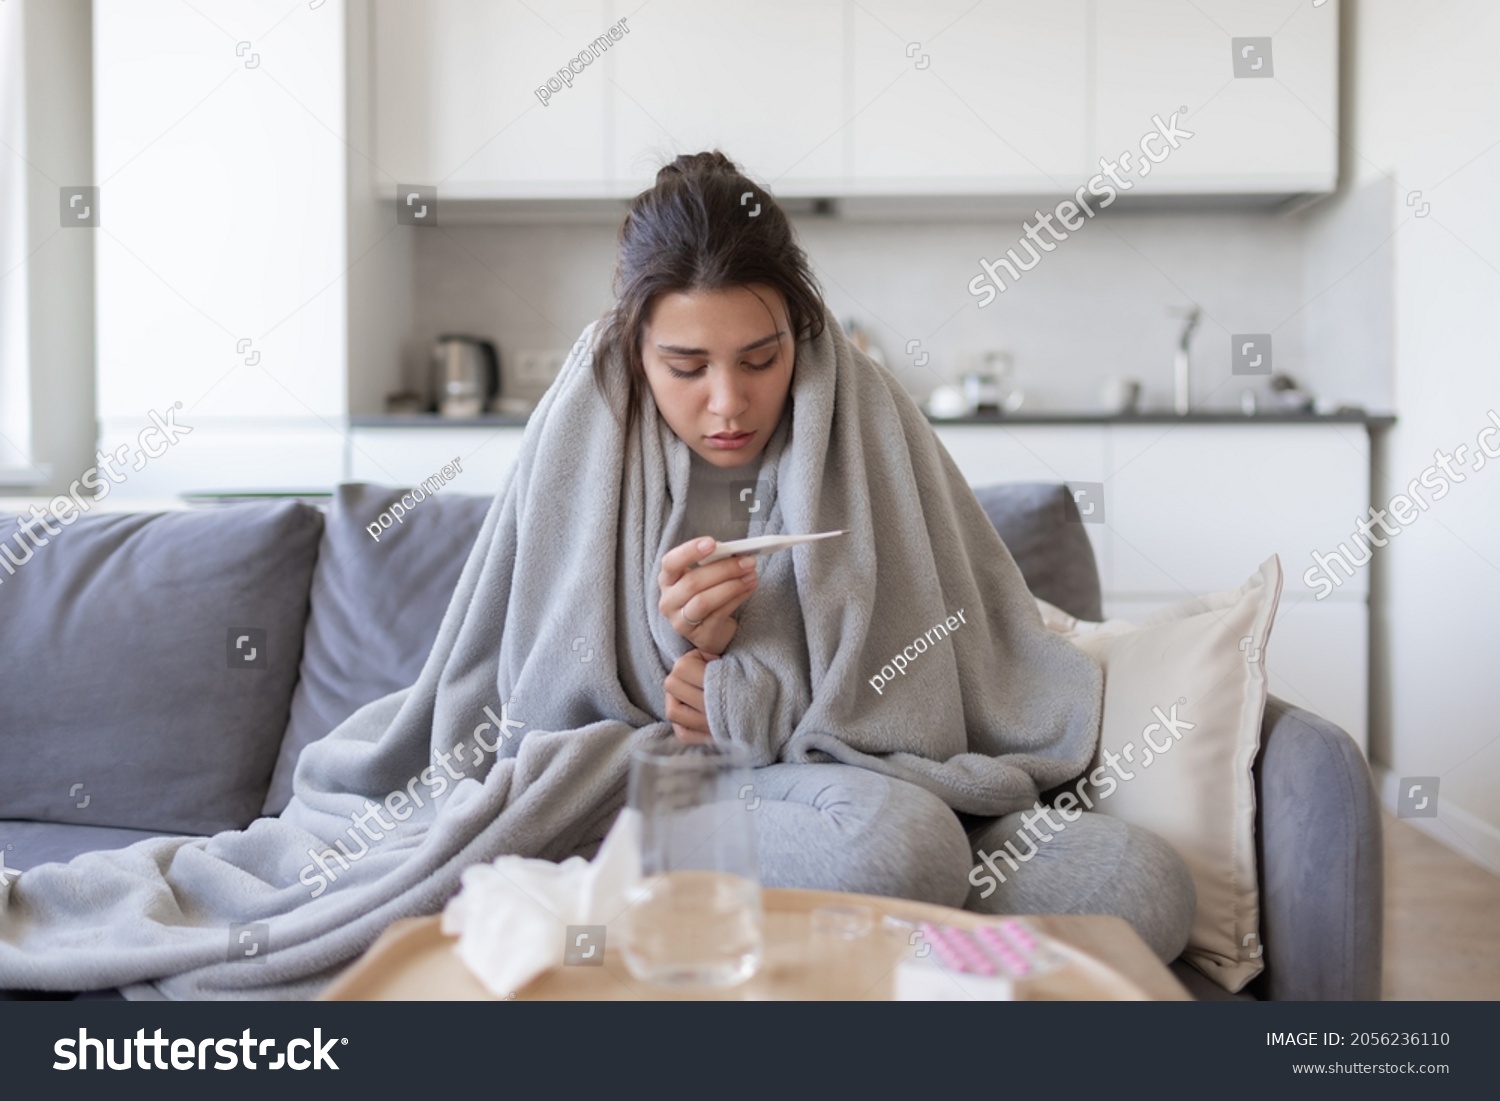 Unhealthy upset young female with fever looking at thermometer with high degree temperature. Sick ill girl suffer from flu or cold, have covid-19 symptoms sitting covered blanket on couch at home. #2056236110